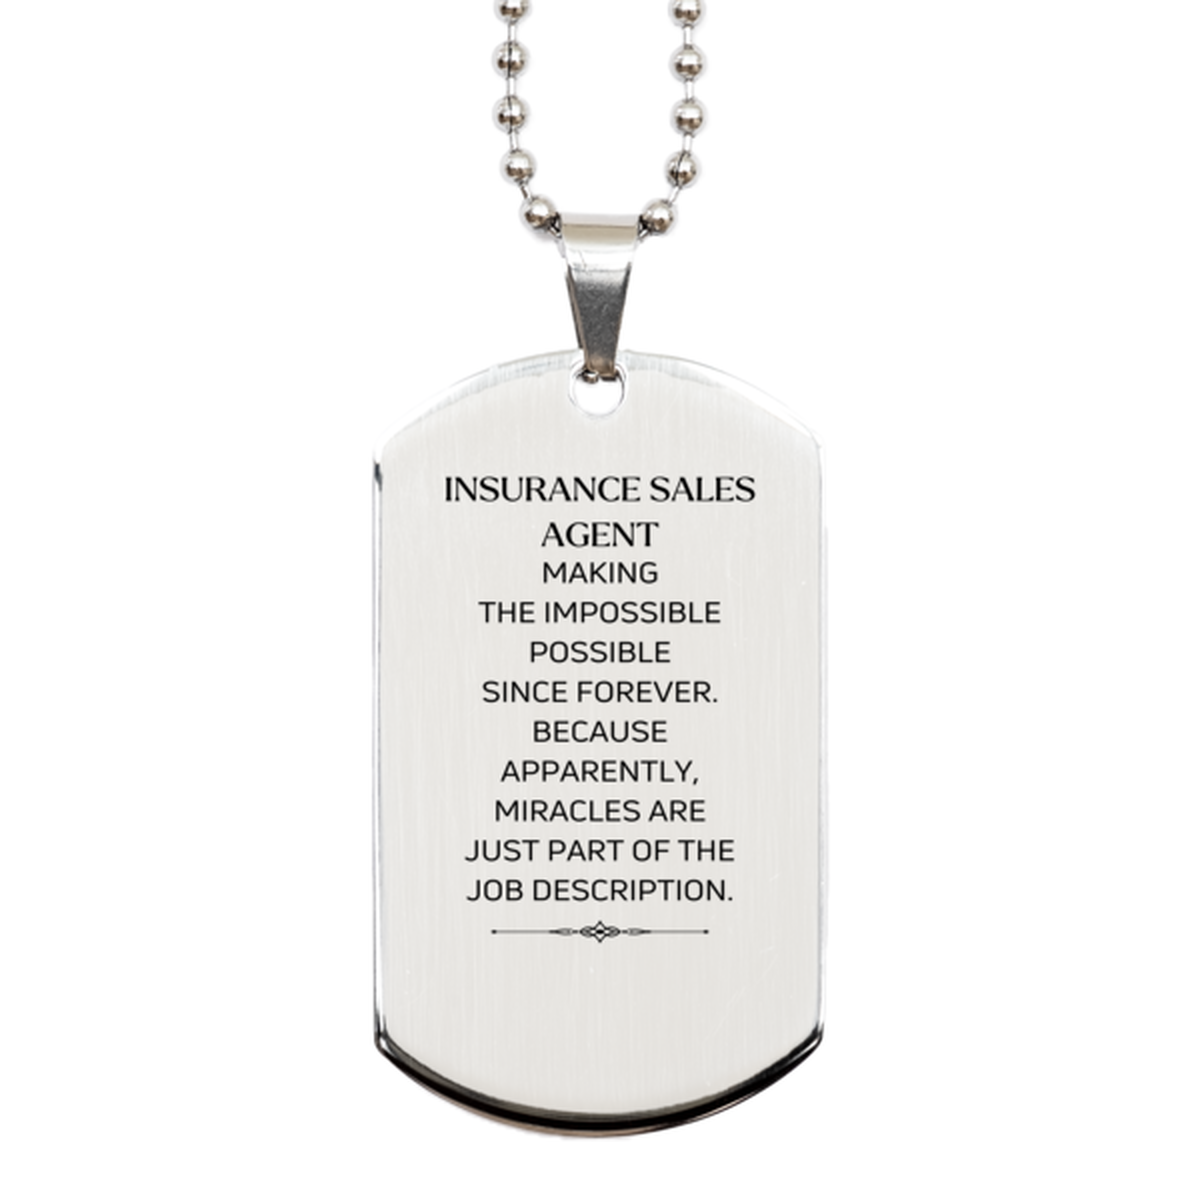 Funny Insurance Sales Agent Gifts, Miracles are just part of the job description, Inspirational Birthday Silver Dog Tag For Insurance Sales Agent, Men, Women, Coworkers, Friends, Boss